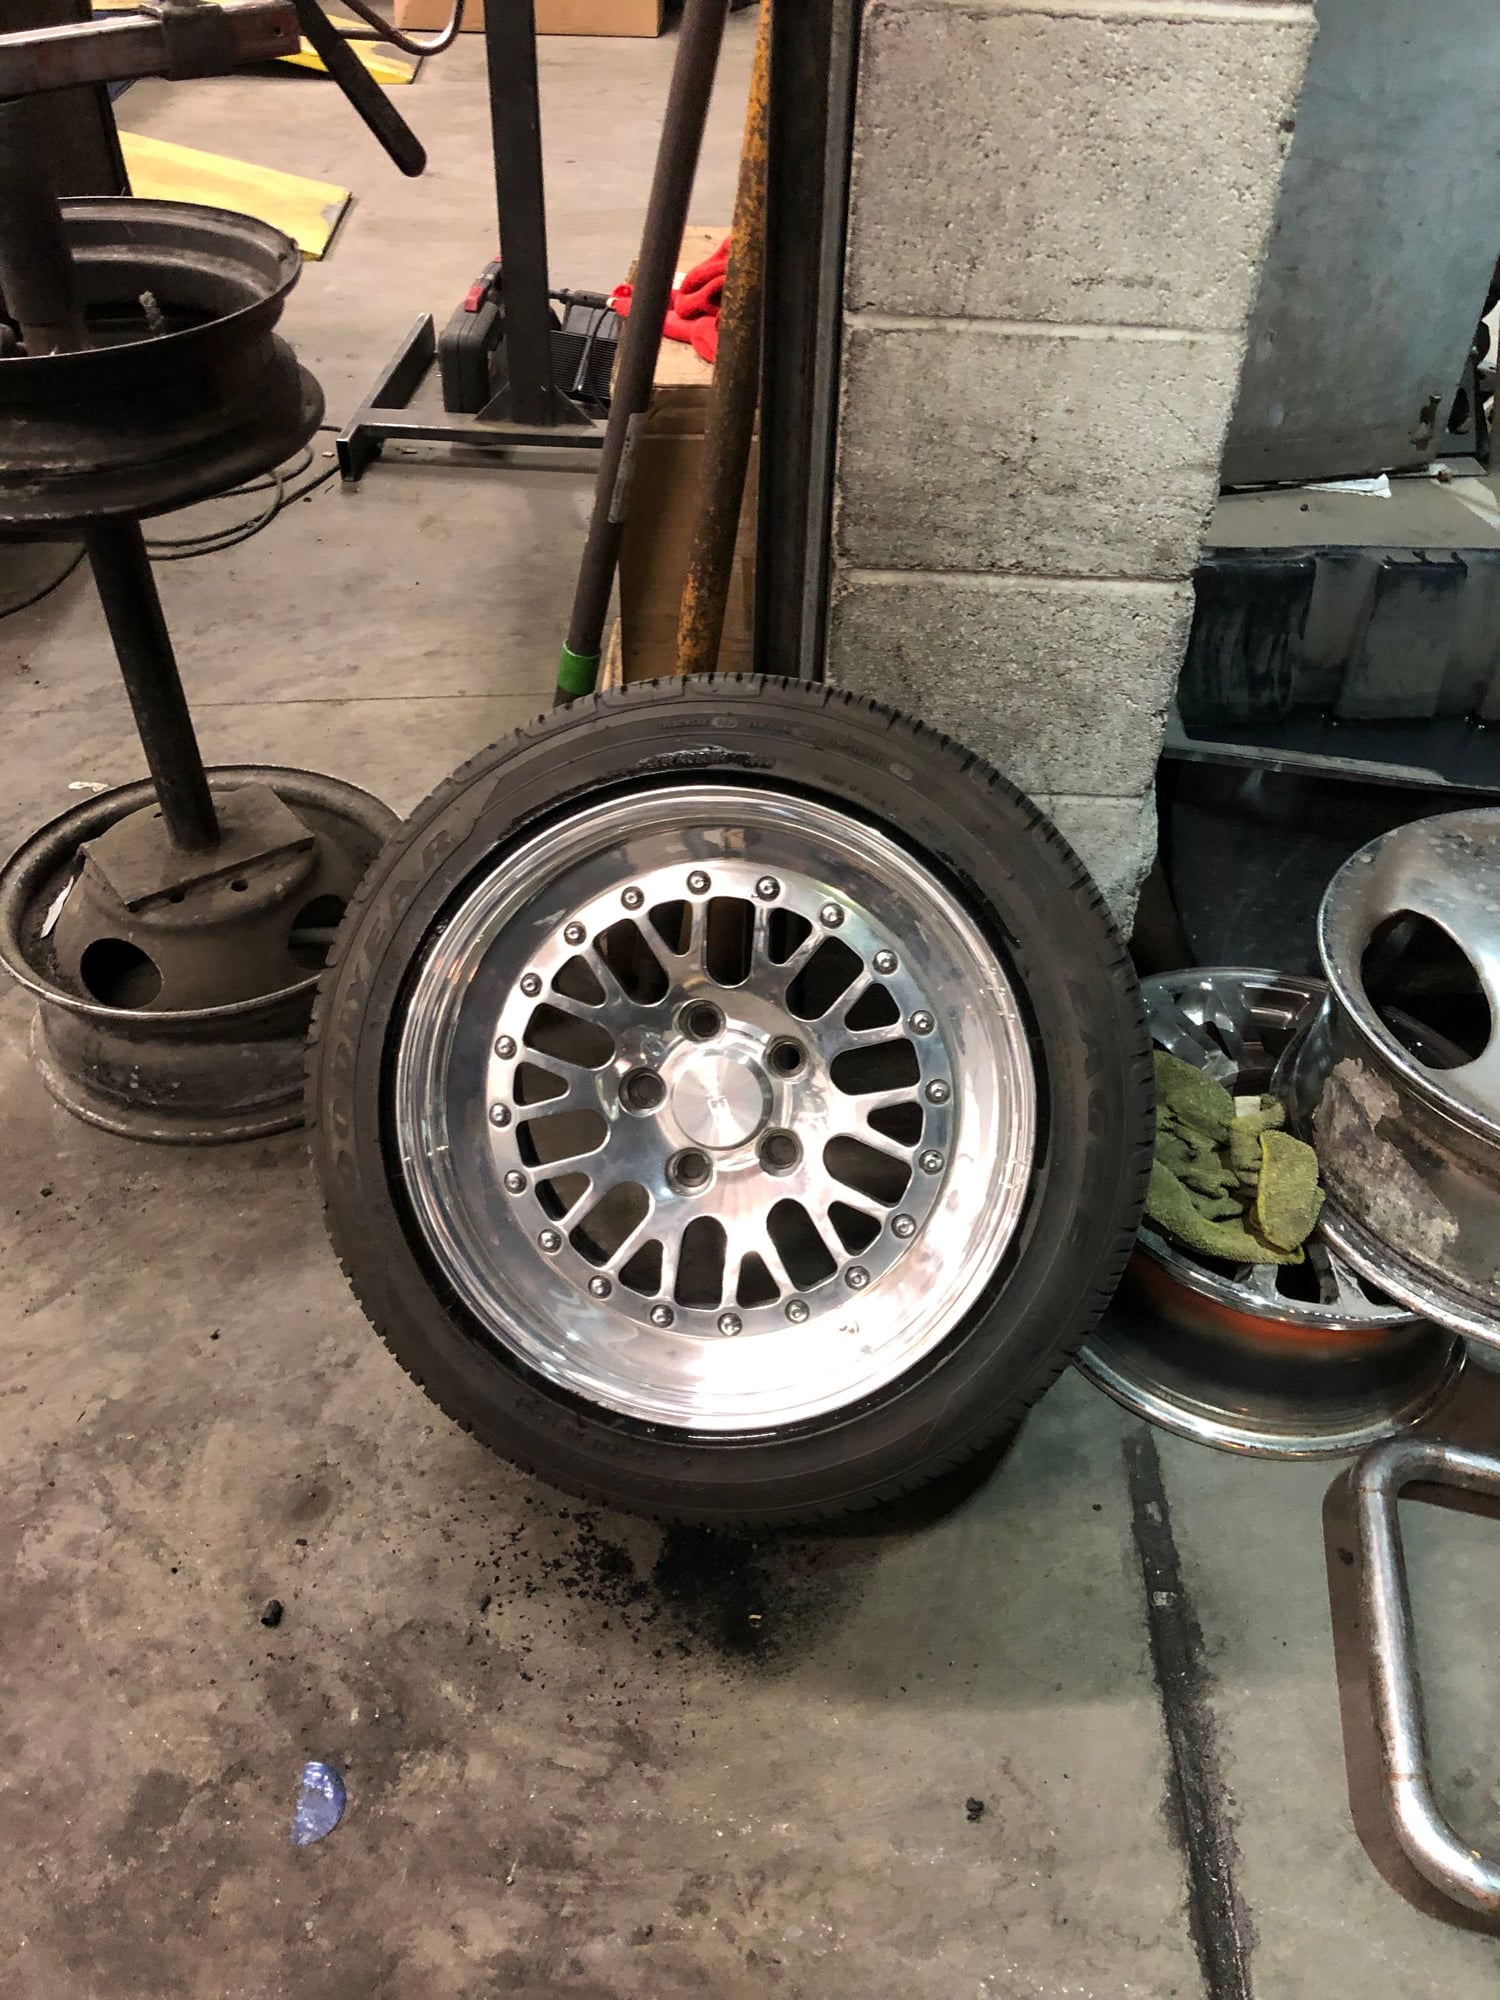  - WTT or Sell ccw classics 17x10 16x10 with tires - Burbank, CA 91504, United States